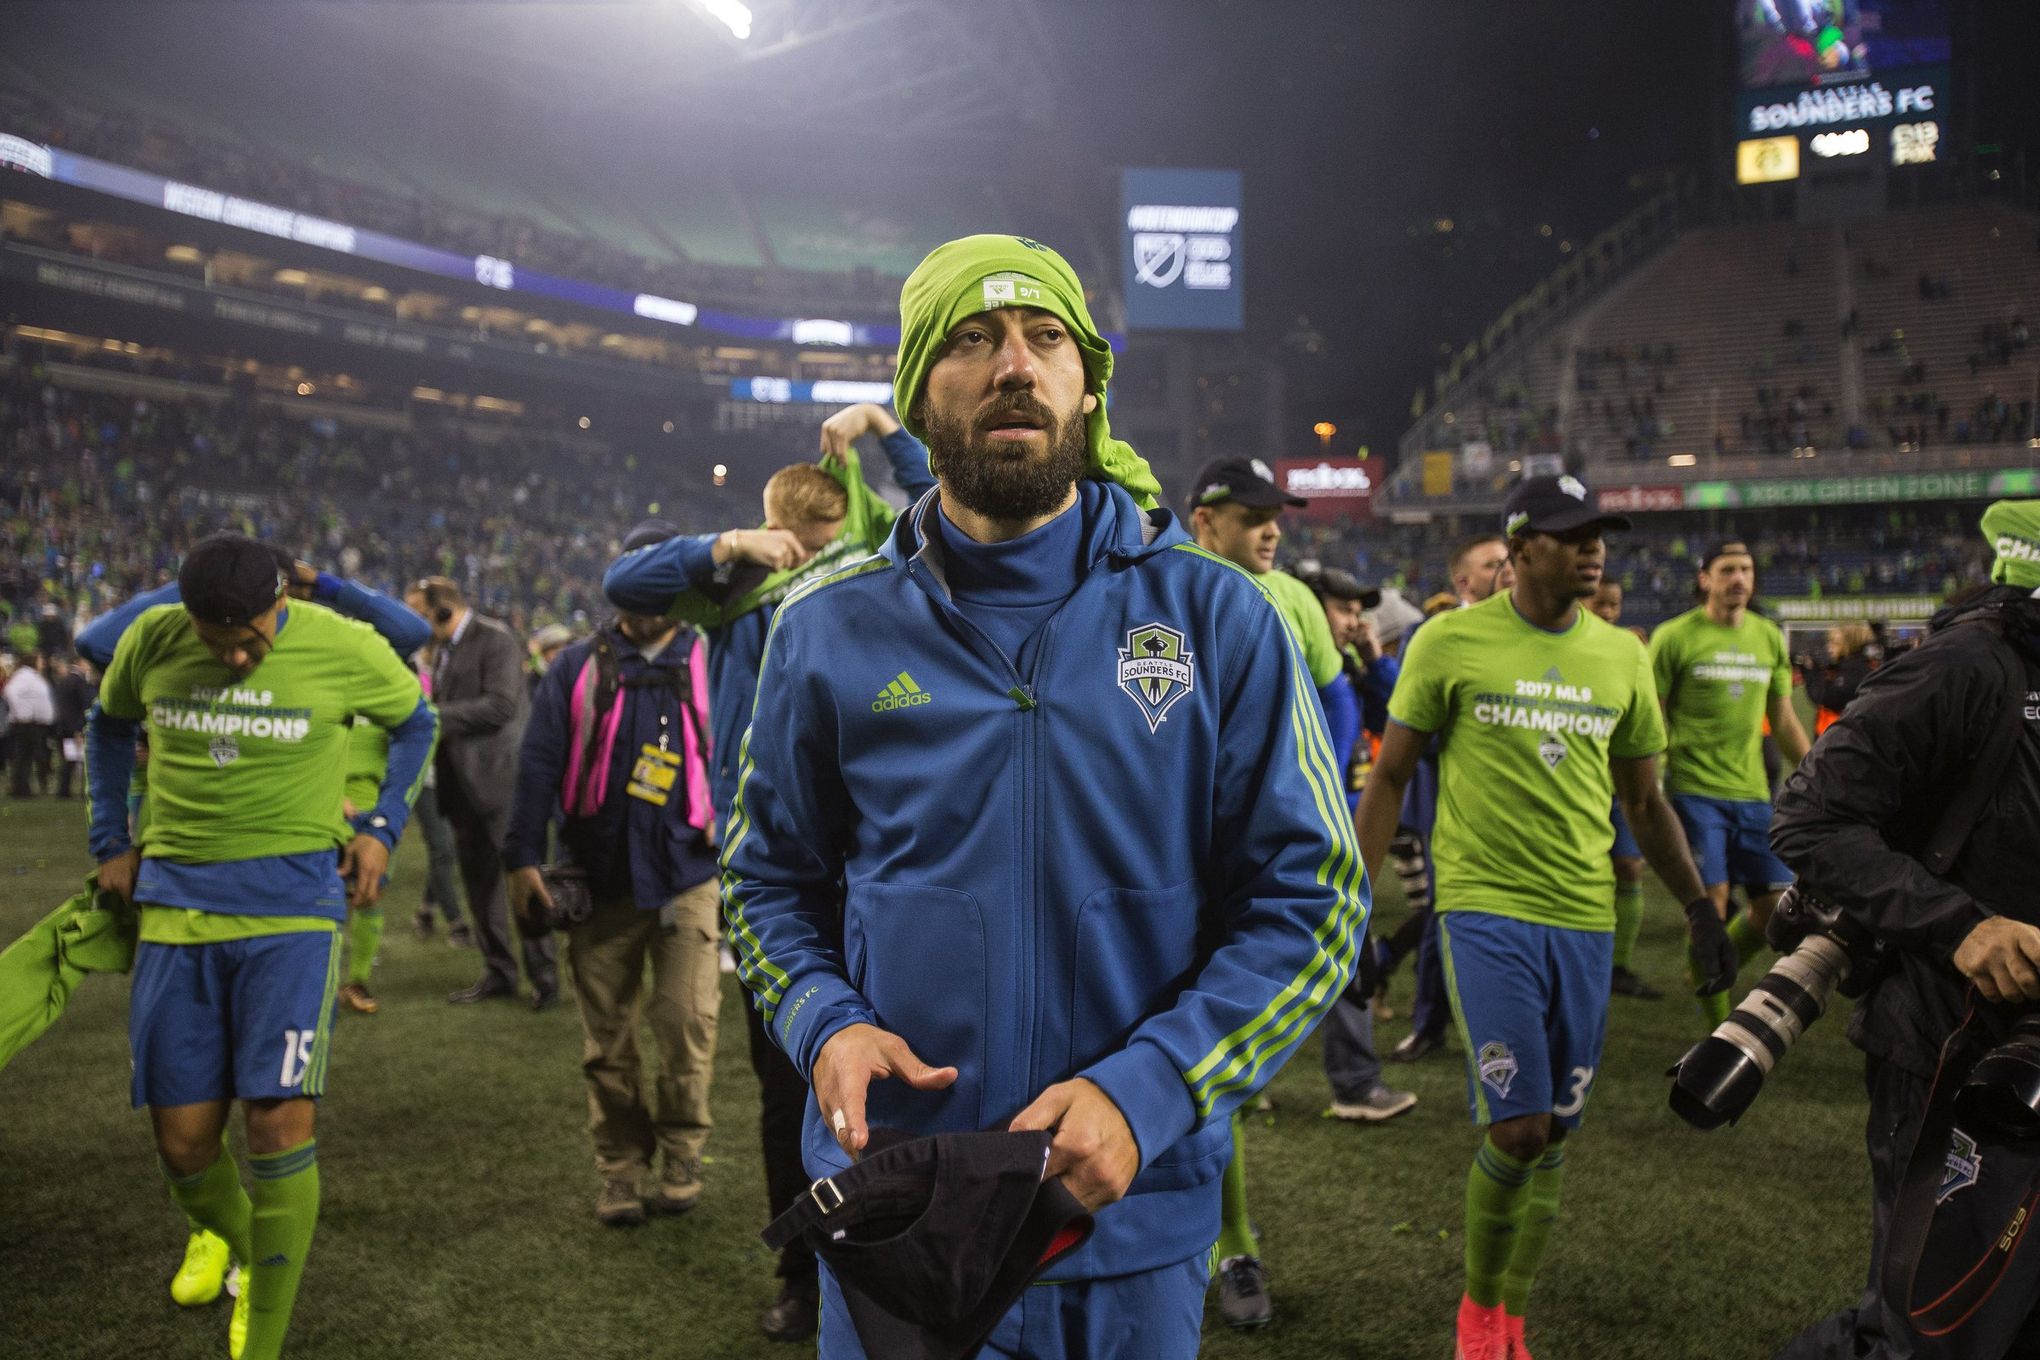 Sounders legend Clint Dempsey opens up about why he retired in